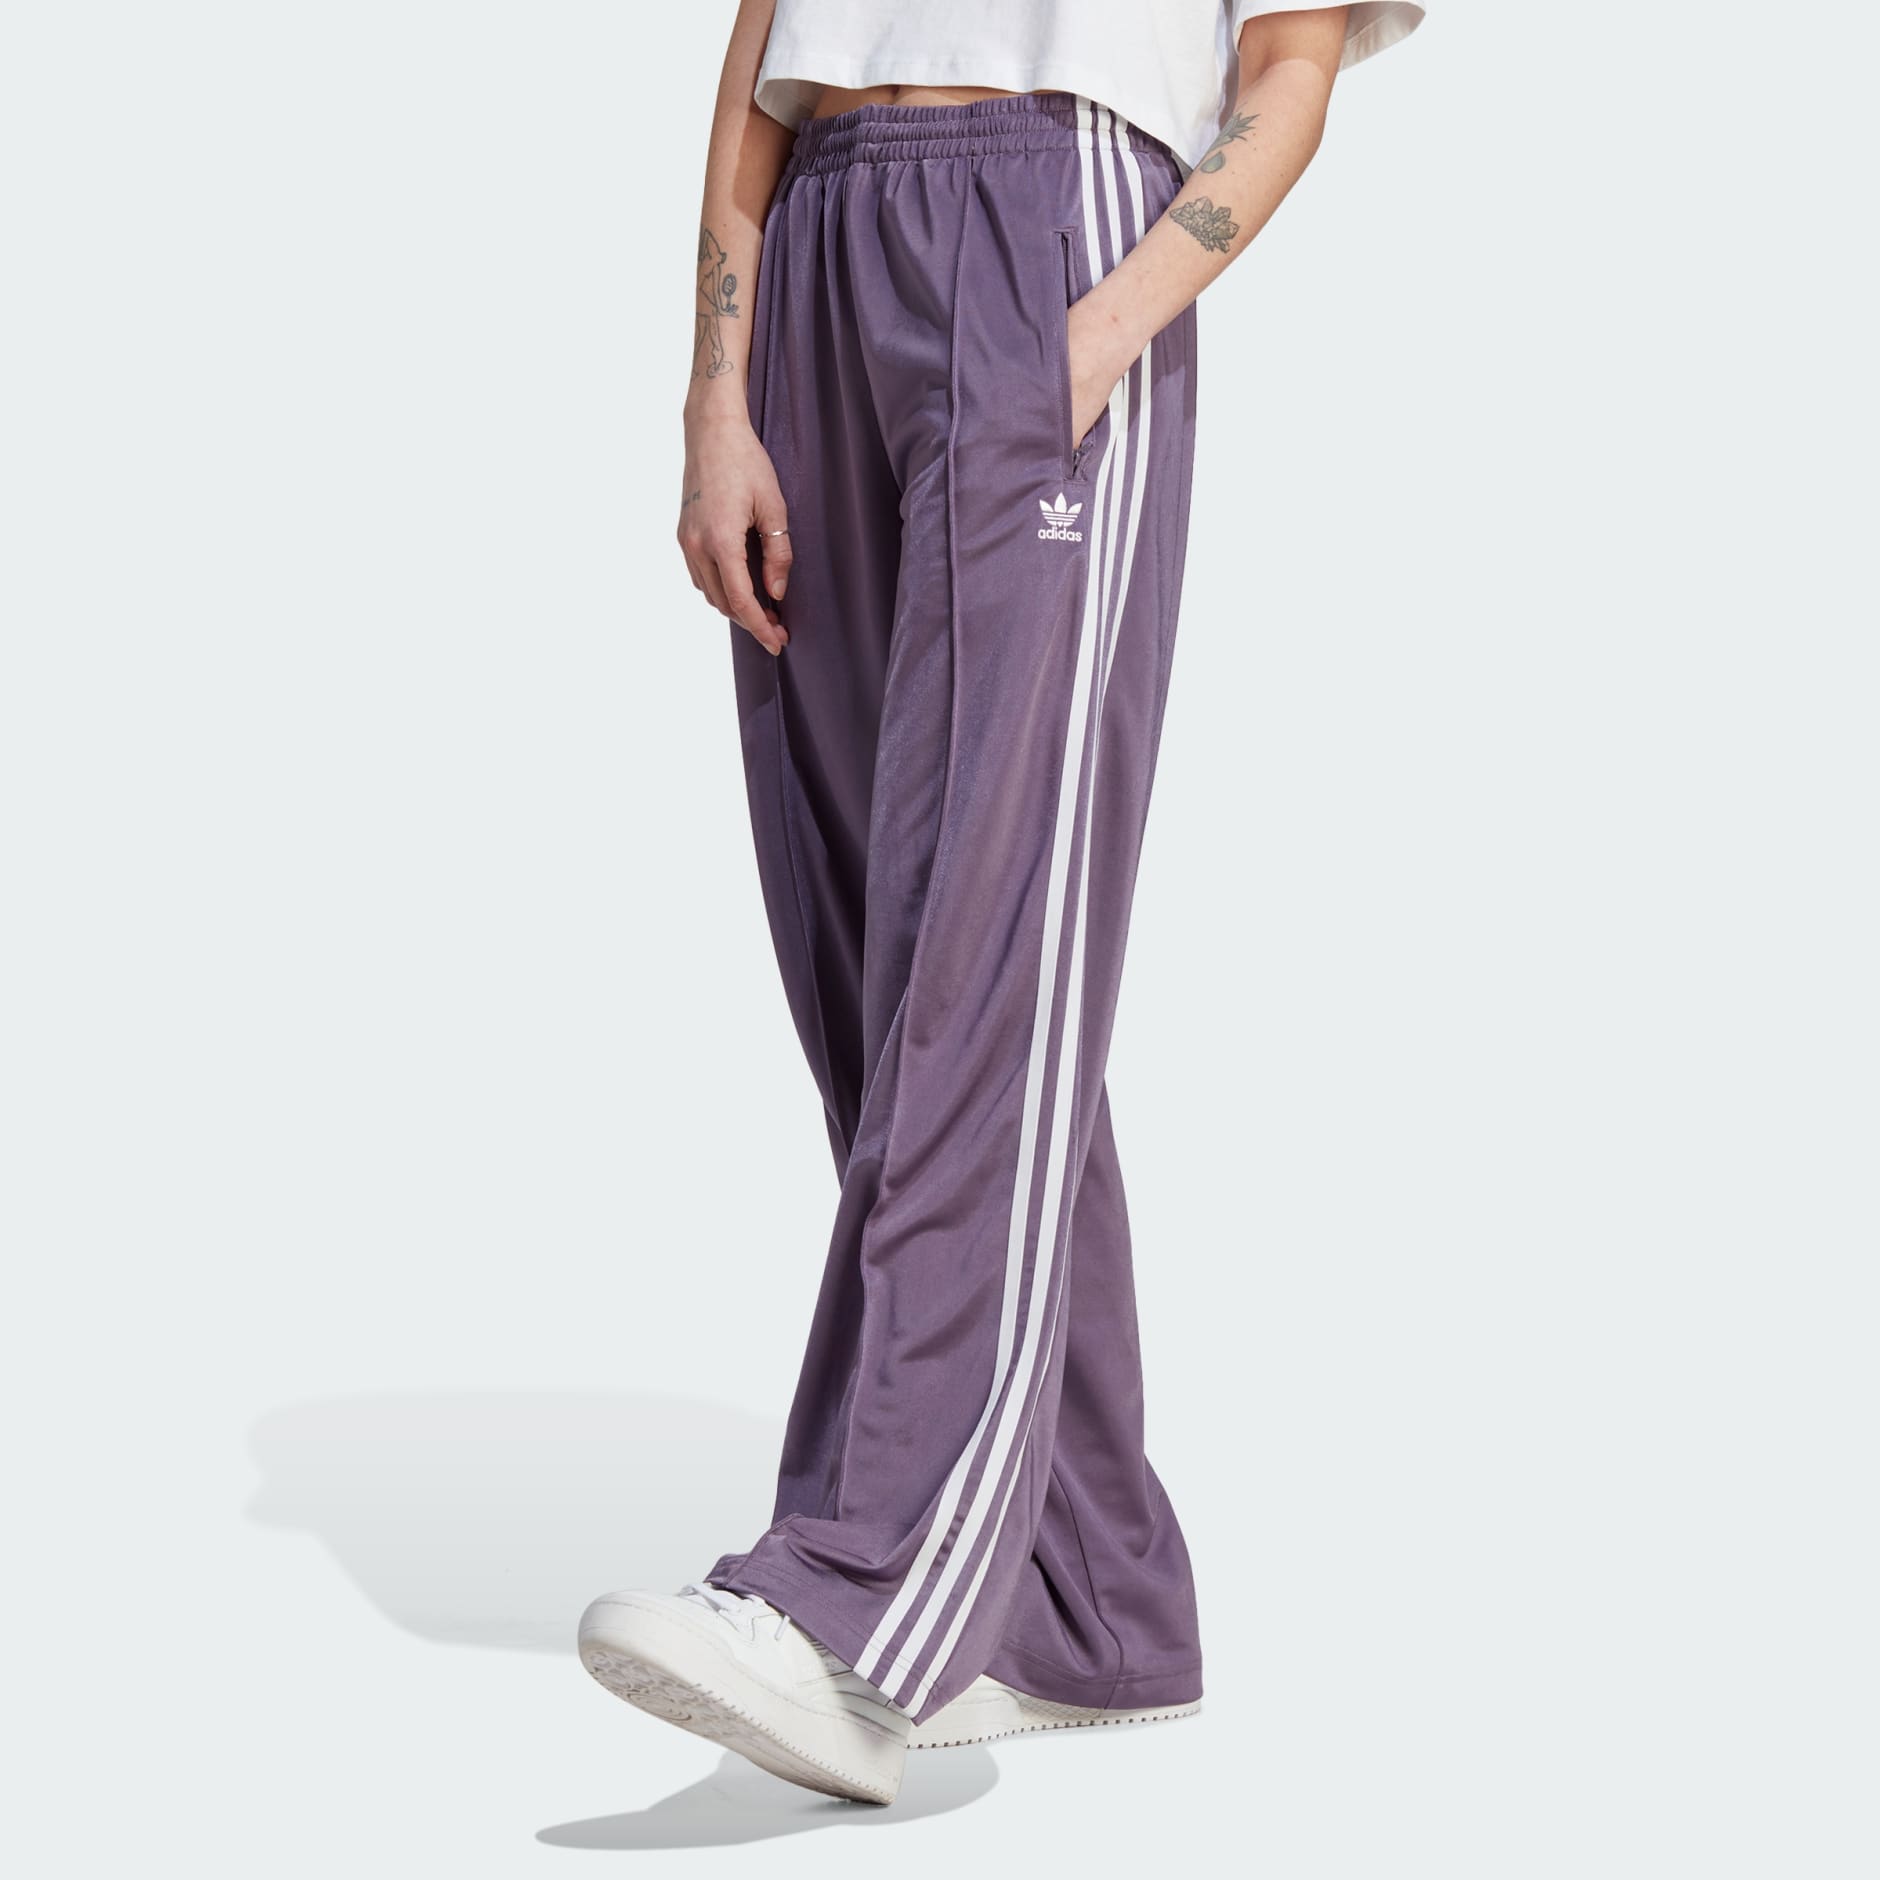 Adidas 100% Polyester Track Pants for Women